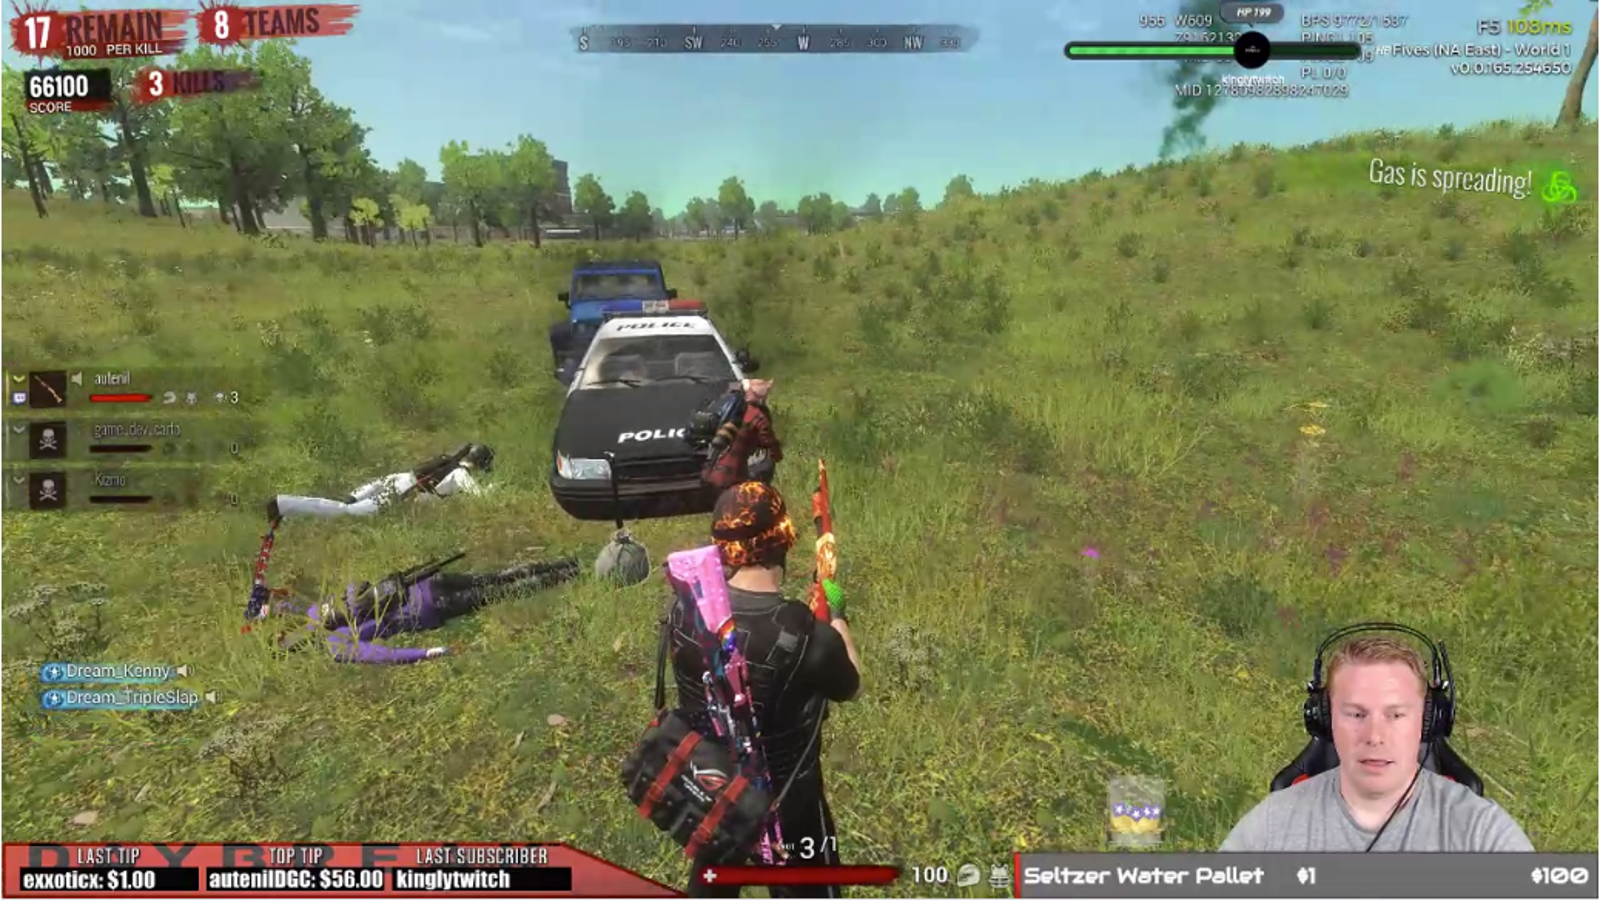 h1z1 when i zoom it zooms out